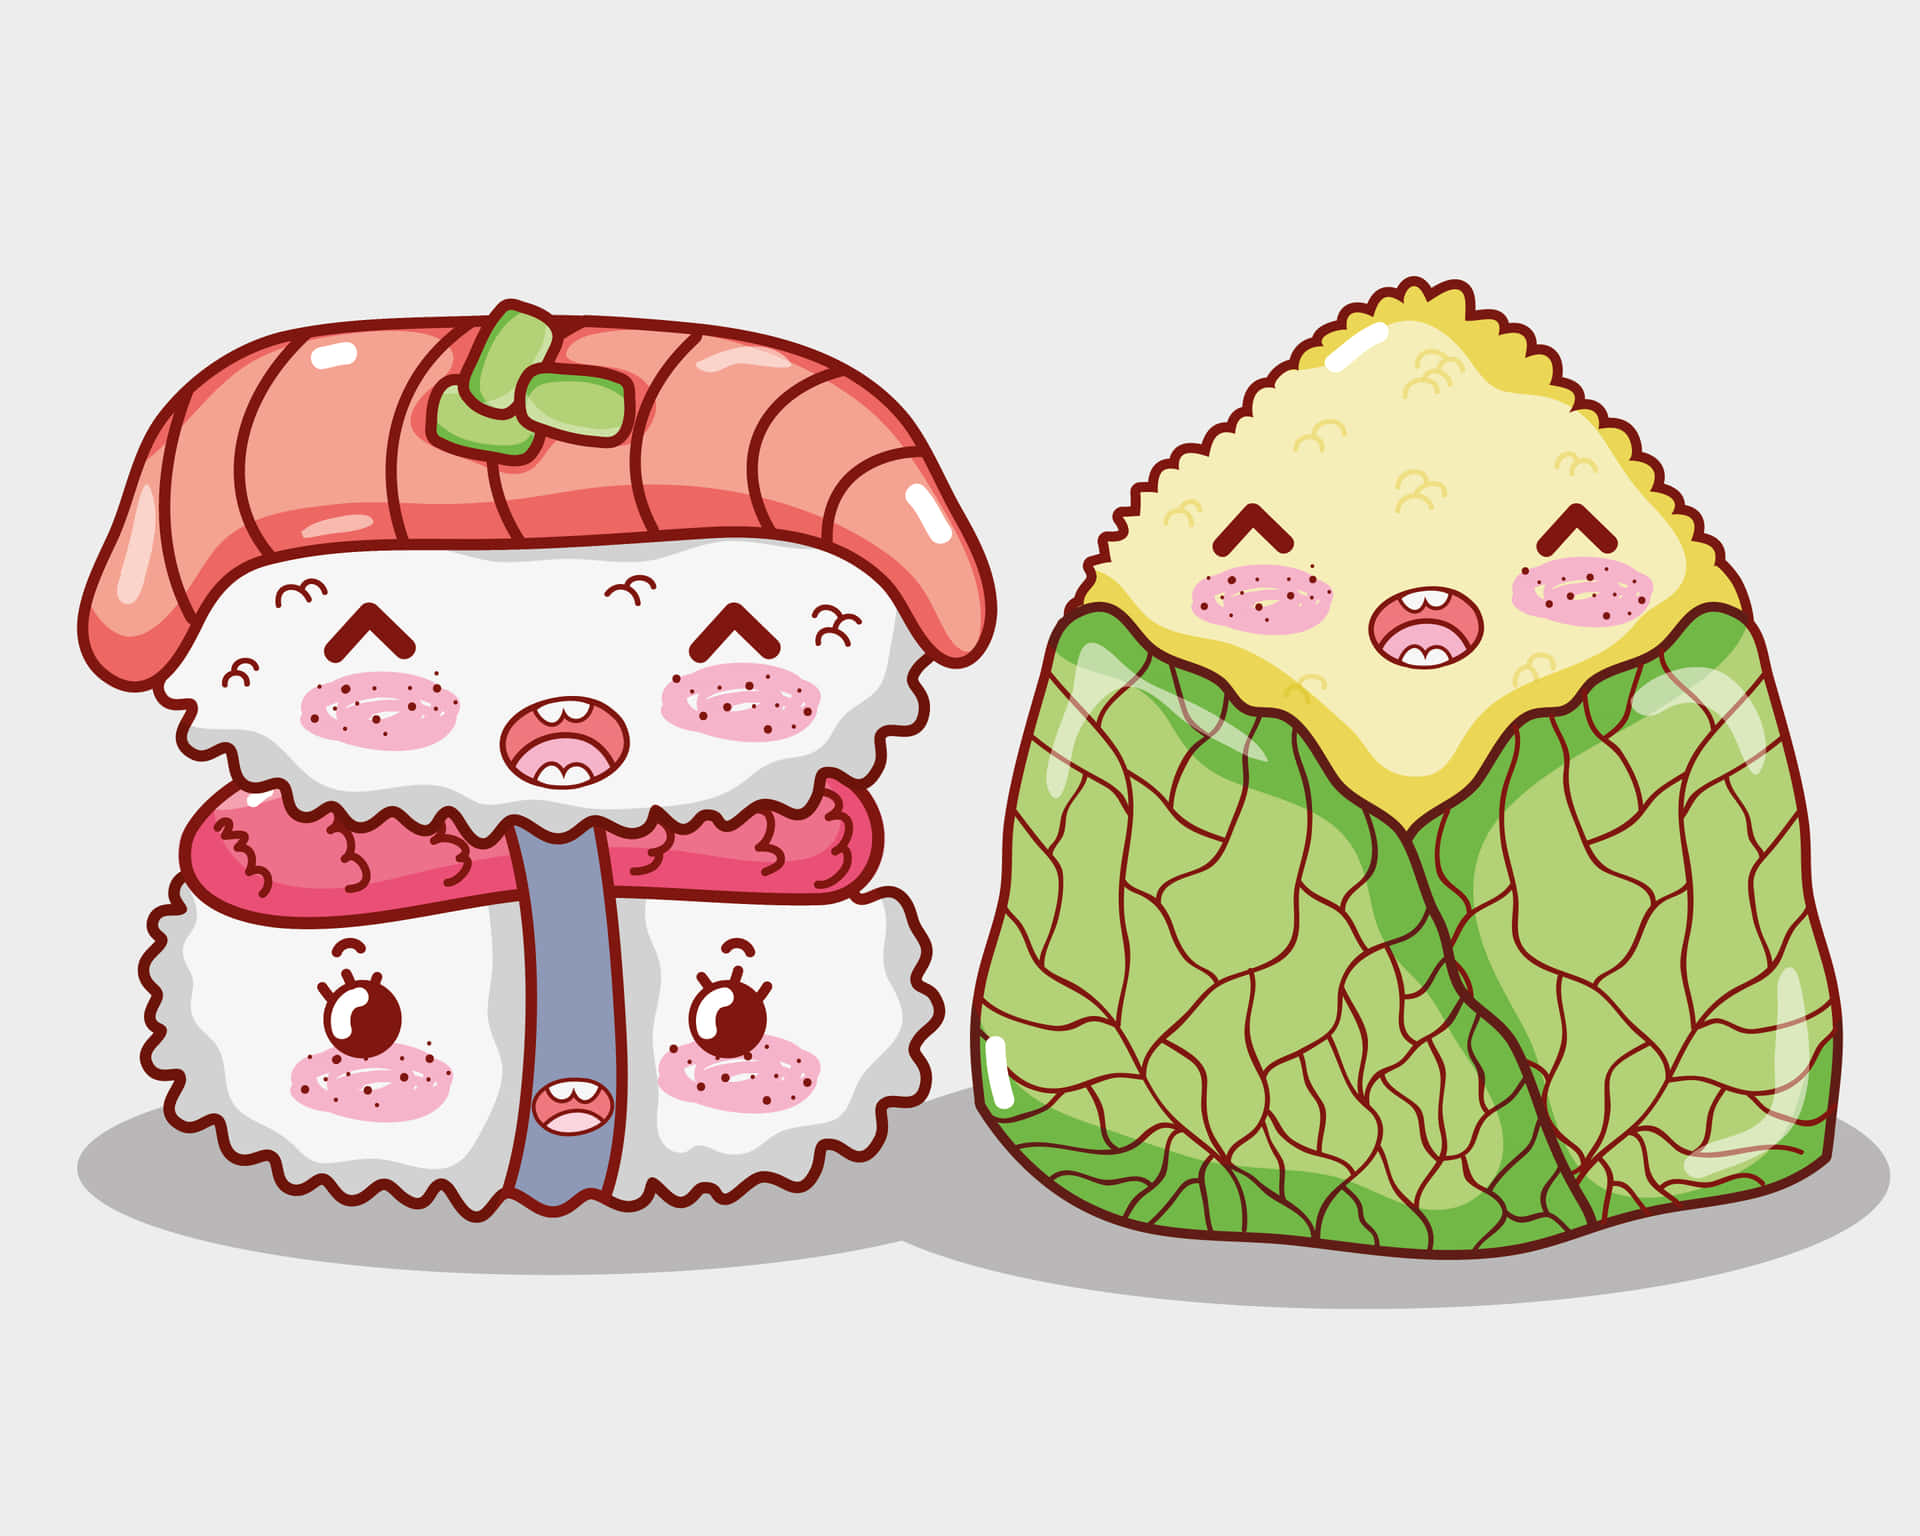 Cute Kawaii Food with Friendly Faces Wallpaper